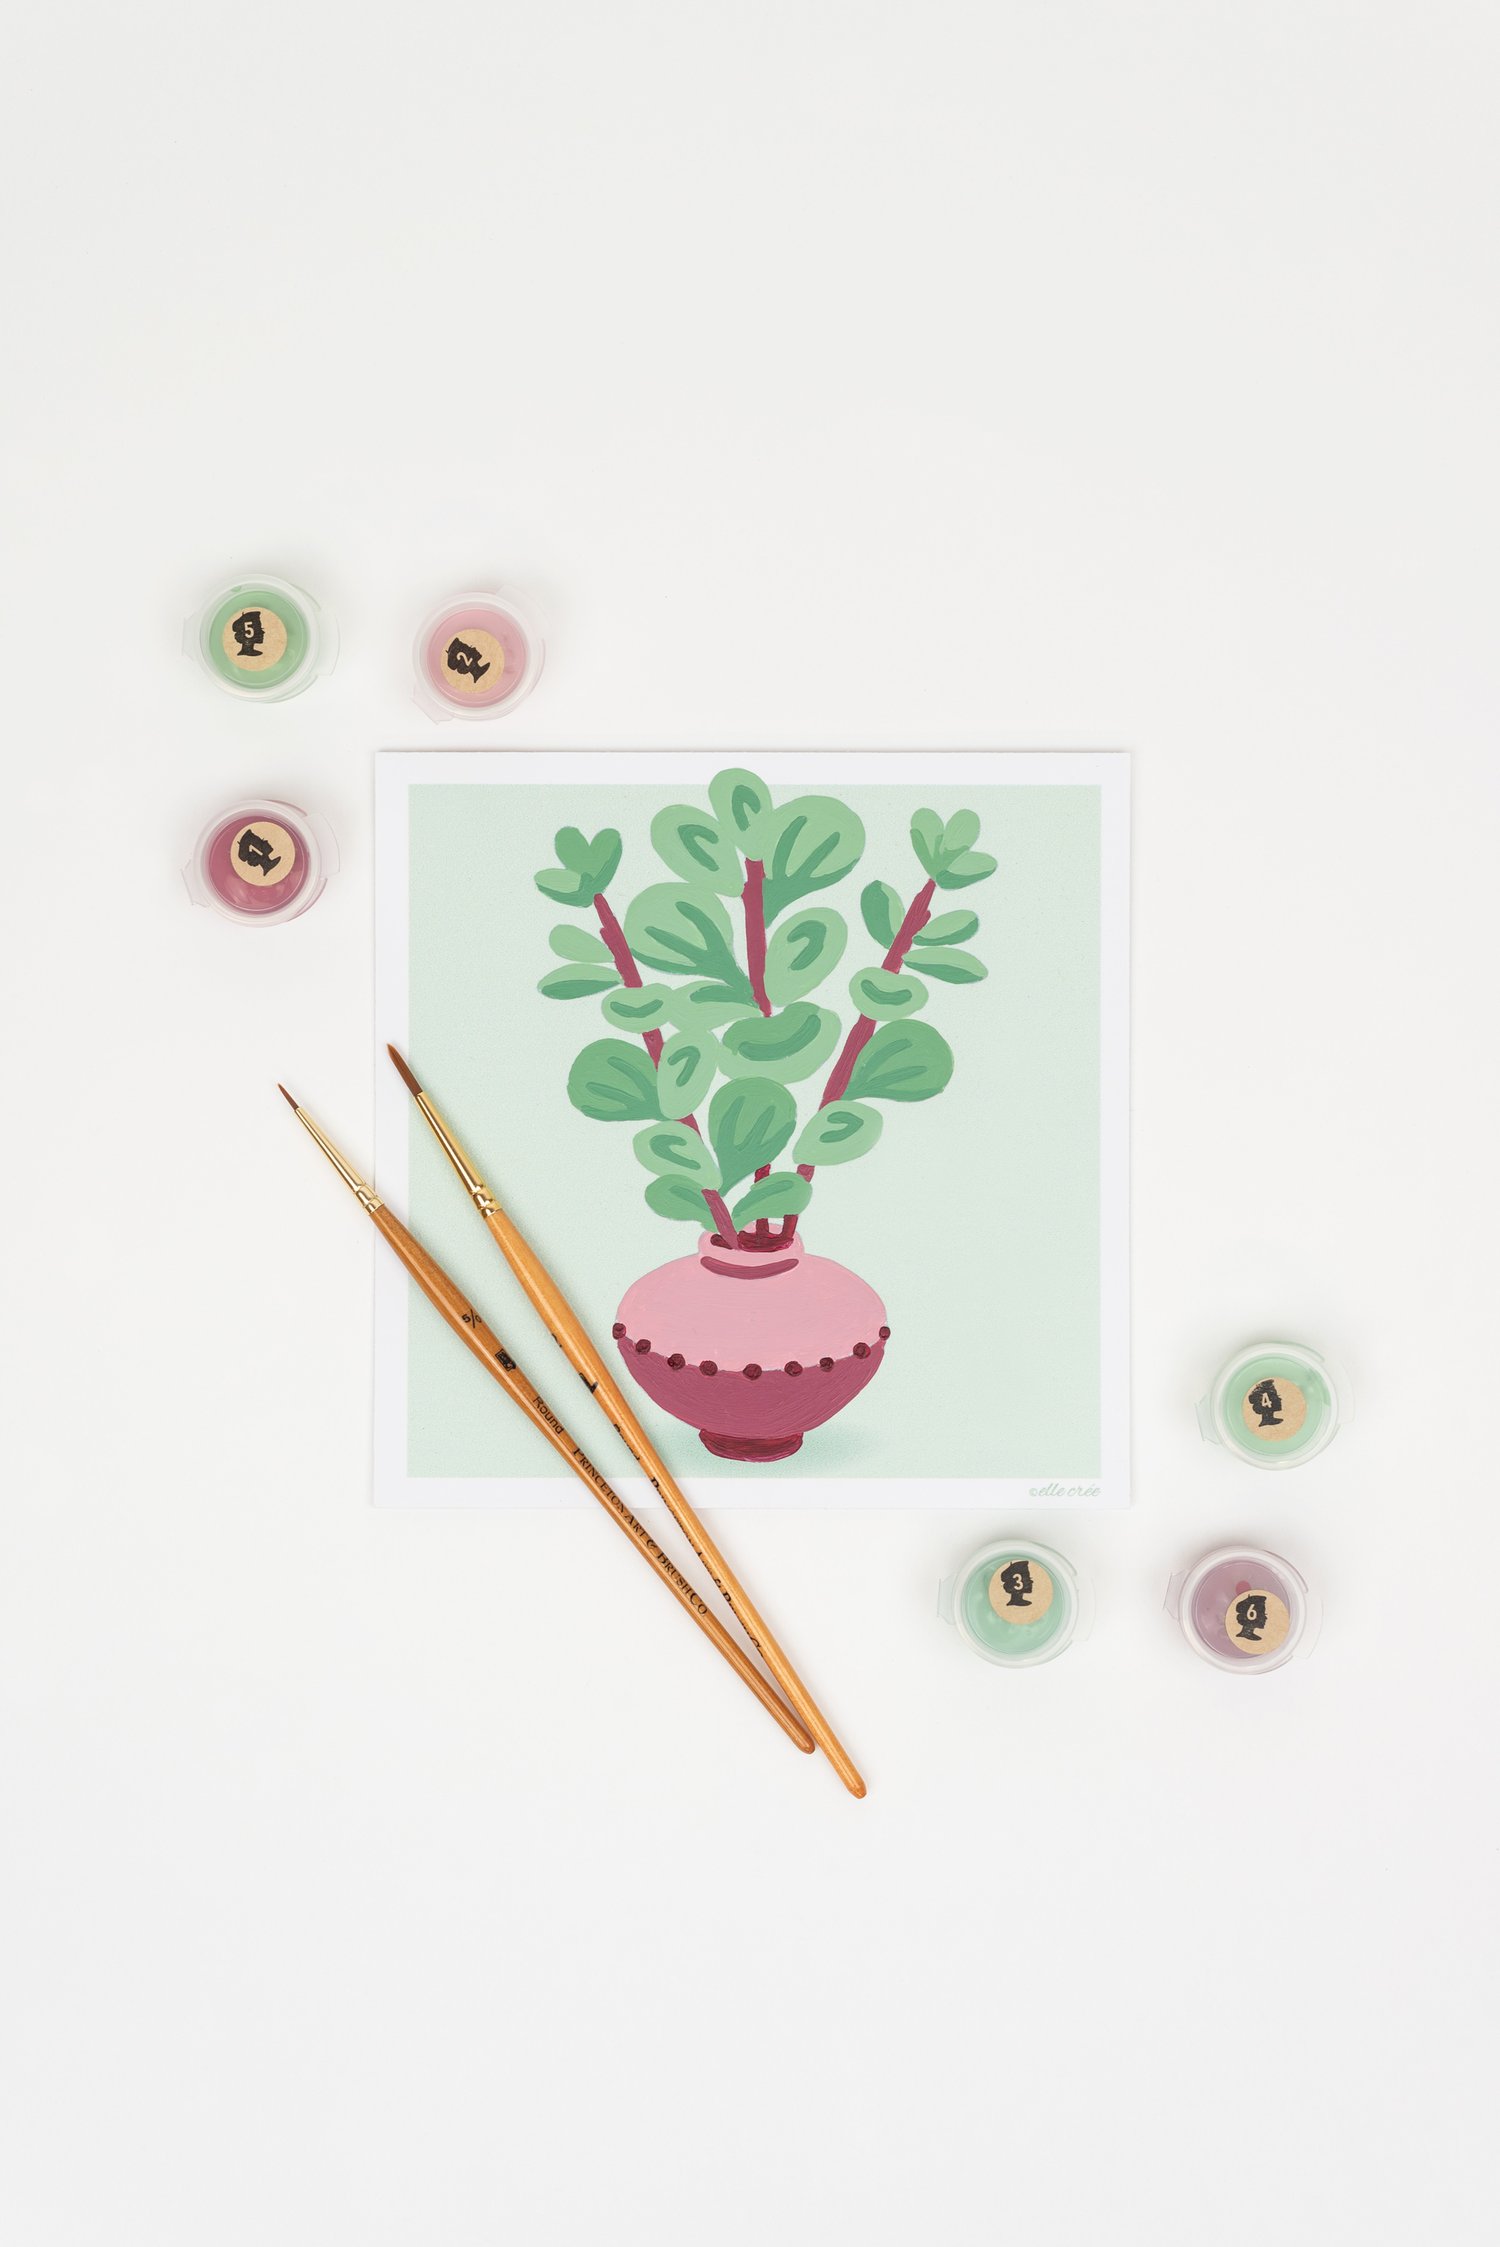 Elle Cree Blooming Succulent in Hobnail Bowl Paint-by-Number Kit